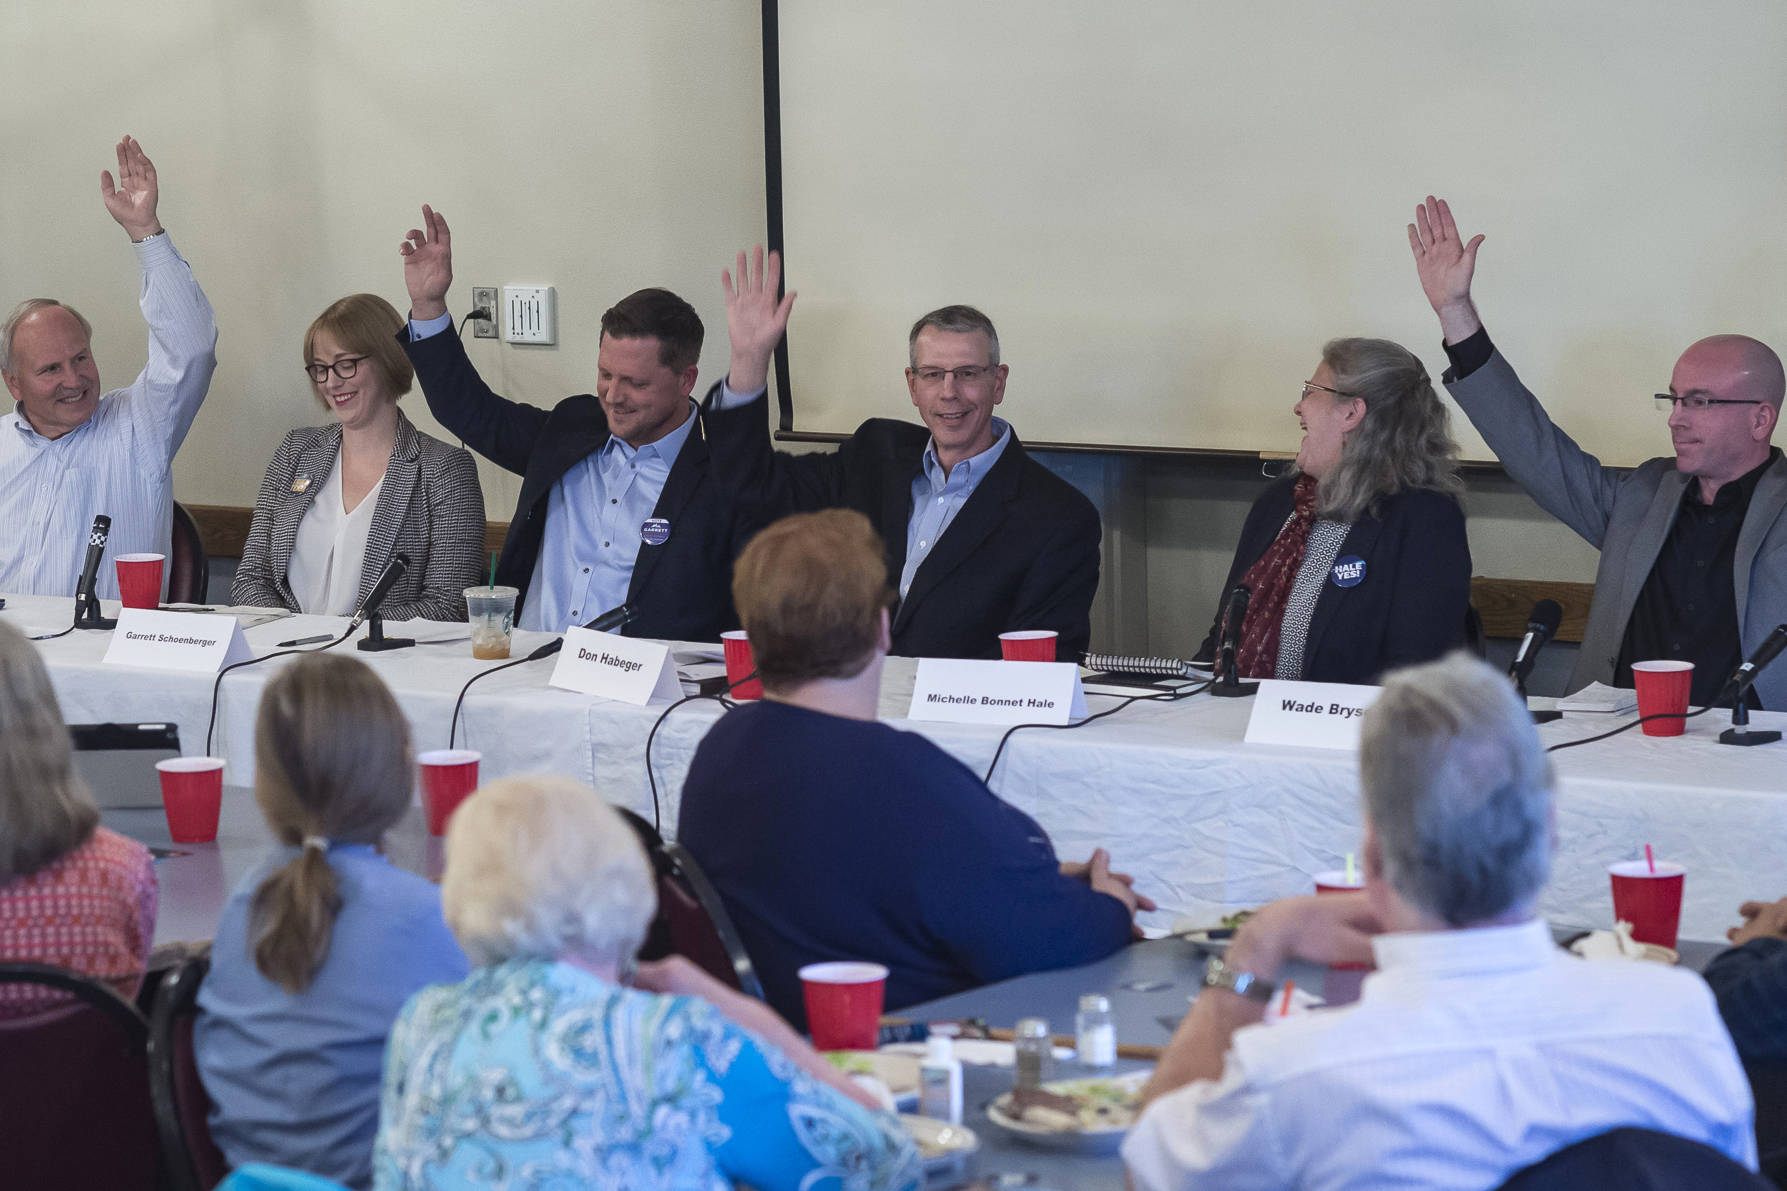 Juneau Assembly candidates for the Areawide and District 2 seats are asked to raise their hand if they support the Juneau Access Project during a forum at the Juneau Chamber of Commerce during its weekly luncheon at the Moose Lodge on Thursday, Sept. 20, 2018. District 2 candidate Emil Mackey did not attend the event because of work travel. (Michael Penn | Juneau Empire)